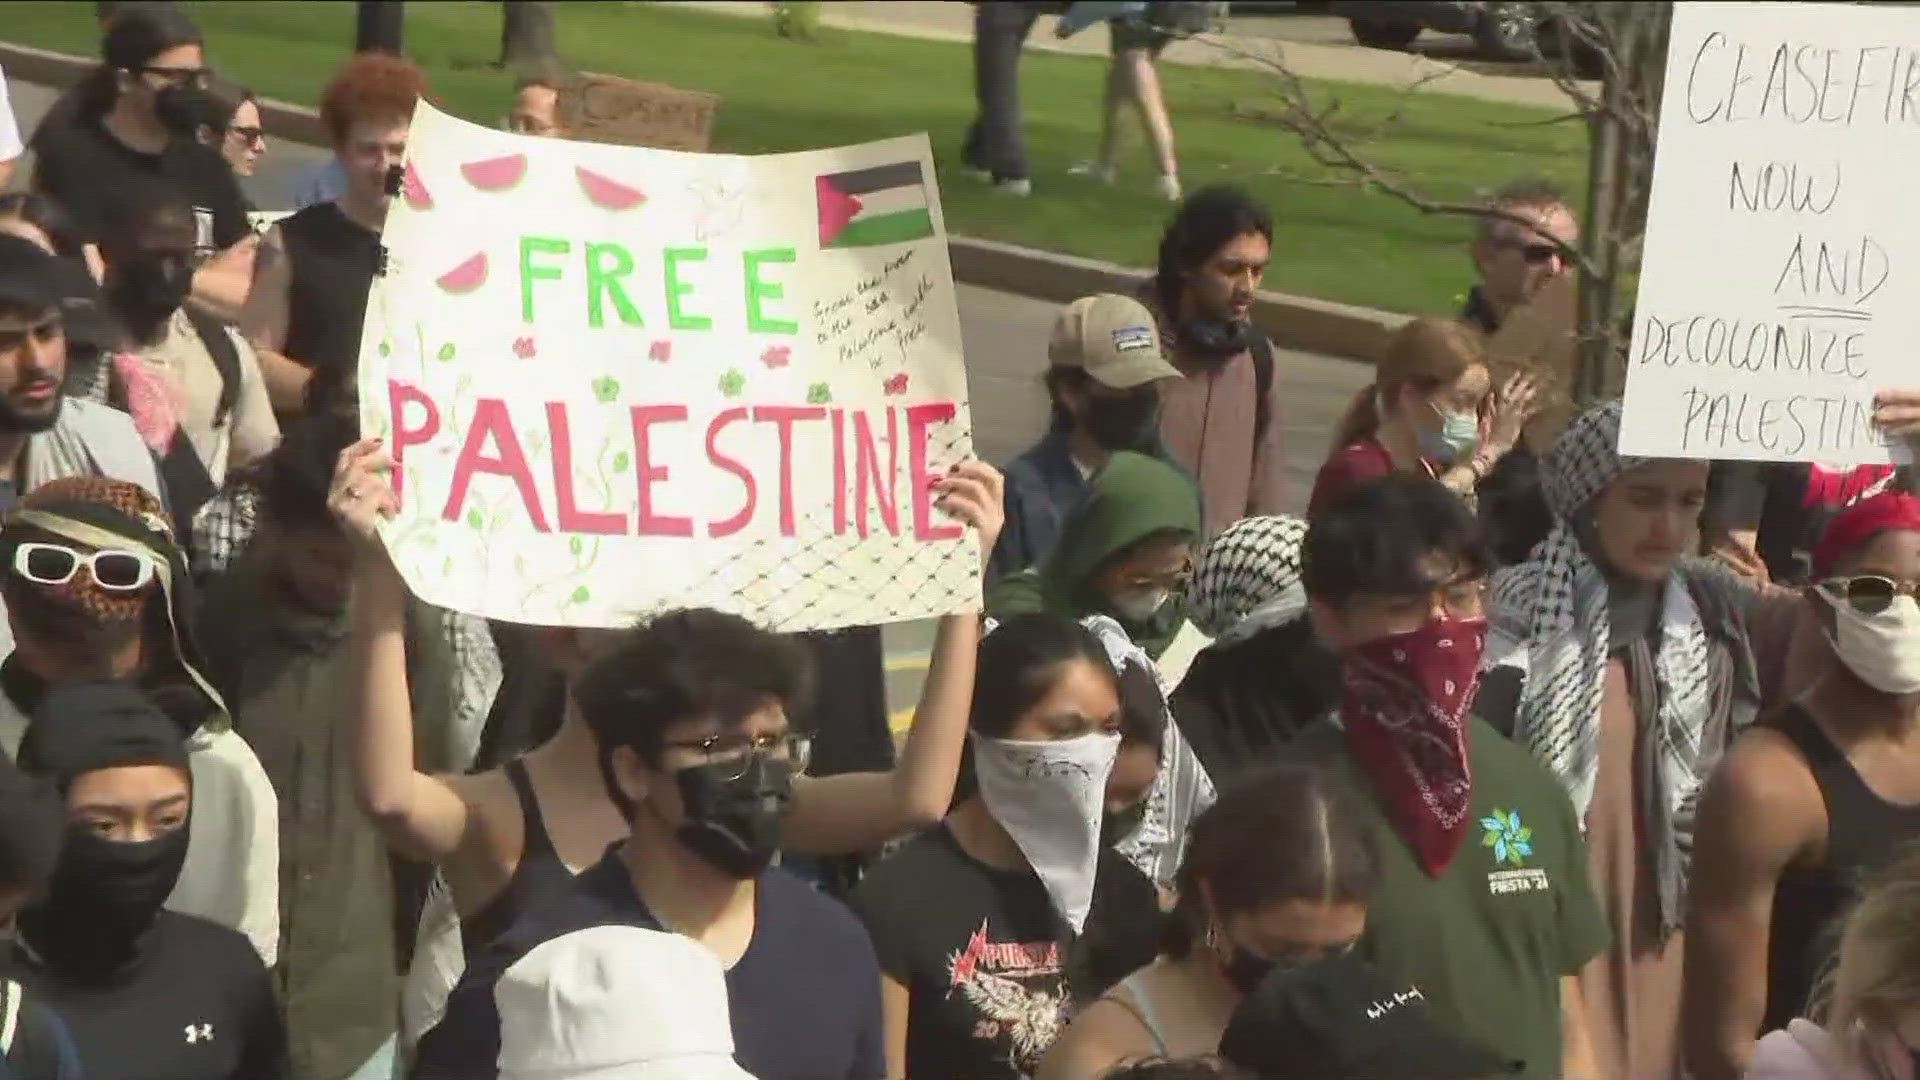 A larger demonstration, with speeches and a march on campus, included participants calling for the university to divest from Israel.